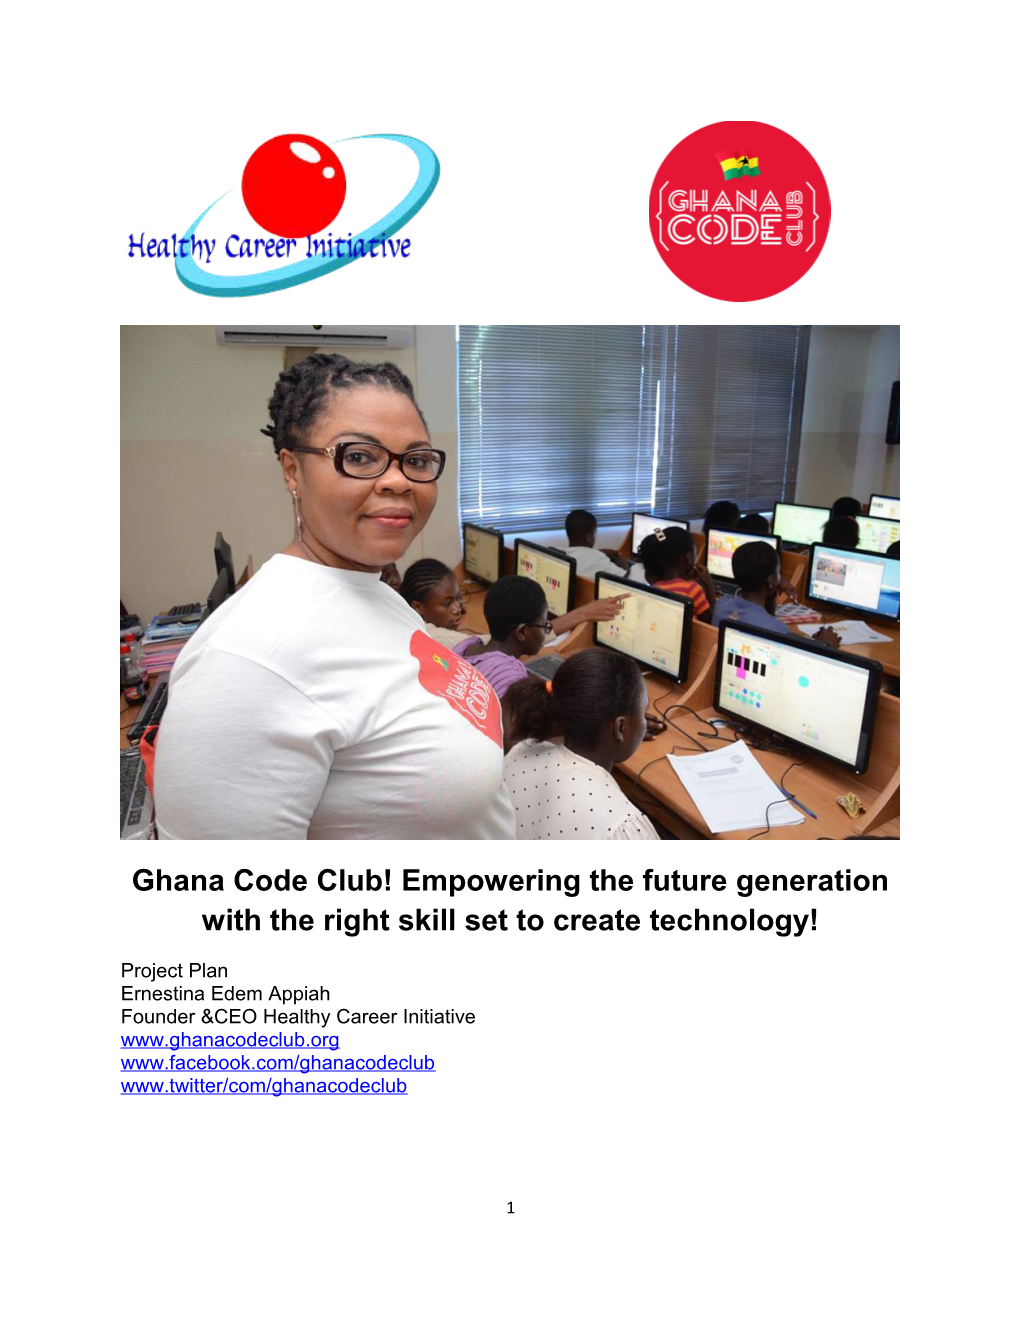 Ghana Code Club! Empowering the Future Generation with the Right Skill Set to Create